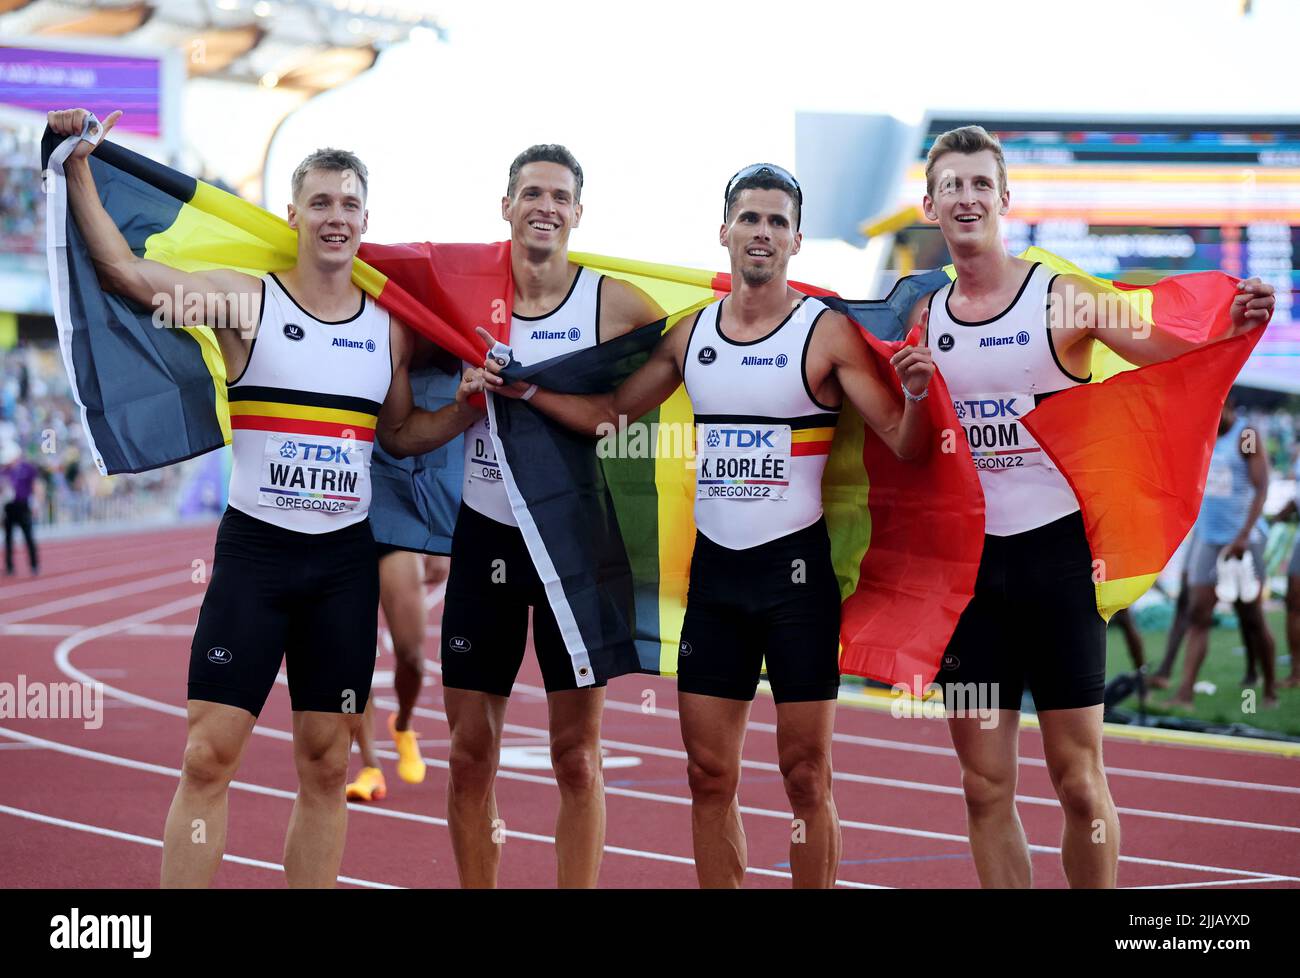 Athletics - World Athletics Championships - Men's 4x400 Metres Relay - Final - Hayward Field, Eugene, Oregon, U.S. - July 24, 2022 Belgium's Julien Watrin, Dylan Borlee, Kevin Borlee and Alexander Doom pose after finishing the men's 4x400 metres final in third place REUTERS/Lucy Nicholson Stock Photo